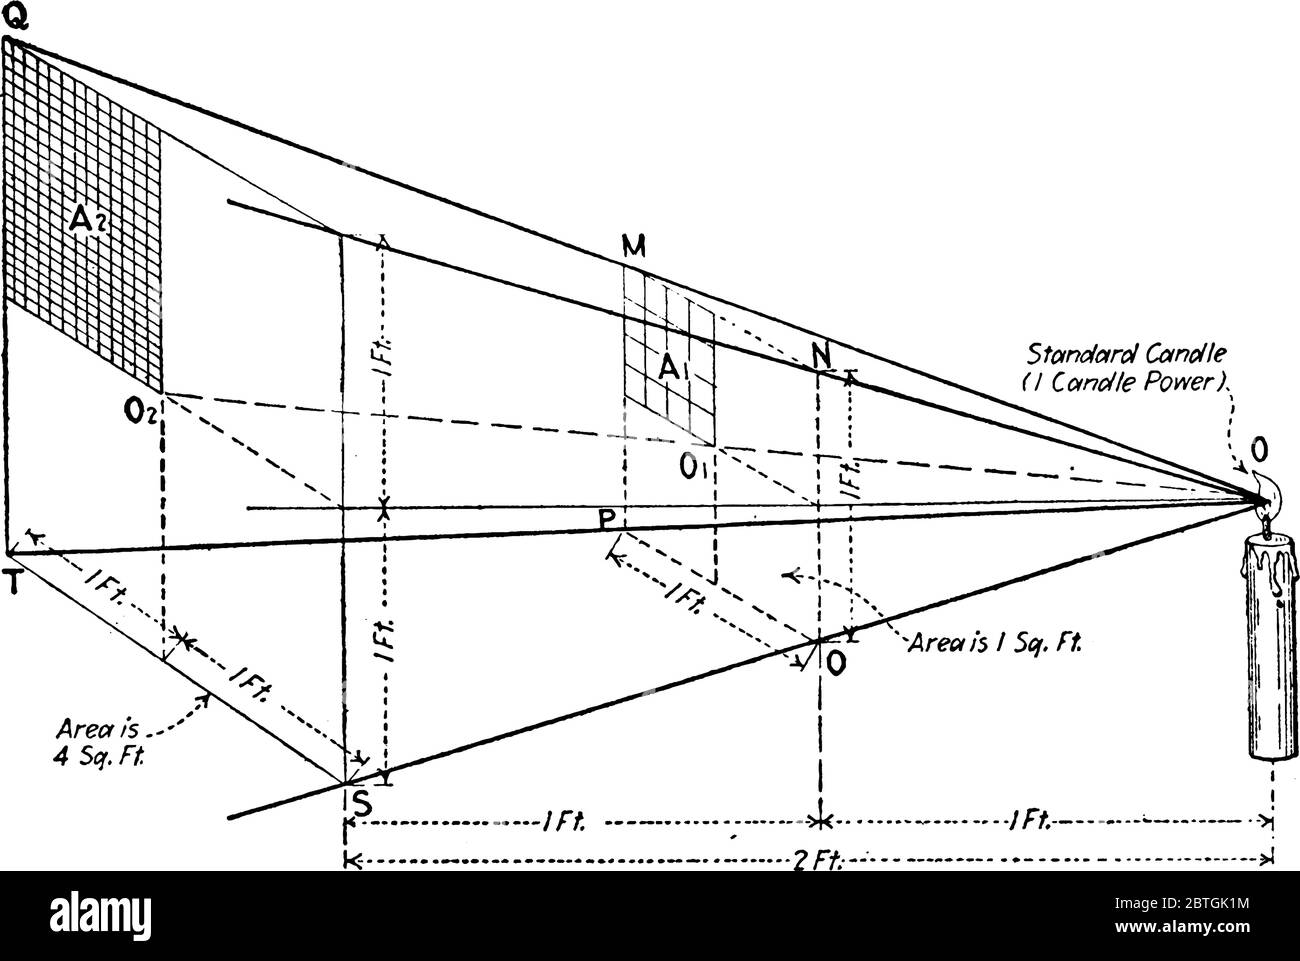 An experimental set-up, to show how luminous density varies inversely as the square of the distance, with the parts labelled, vintage line drawing or Stock Vector